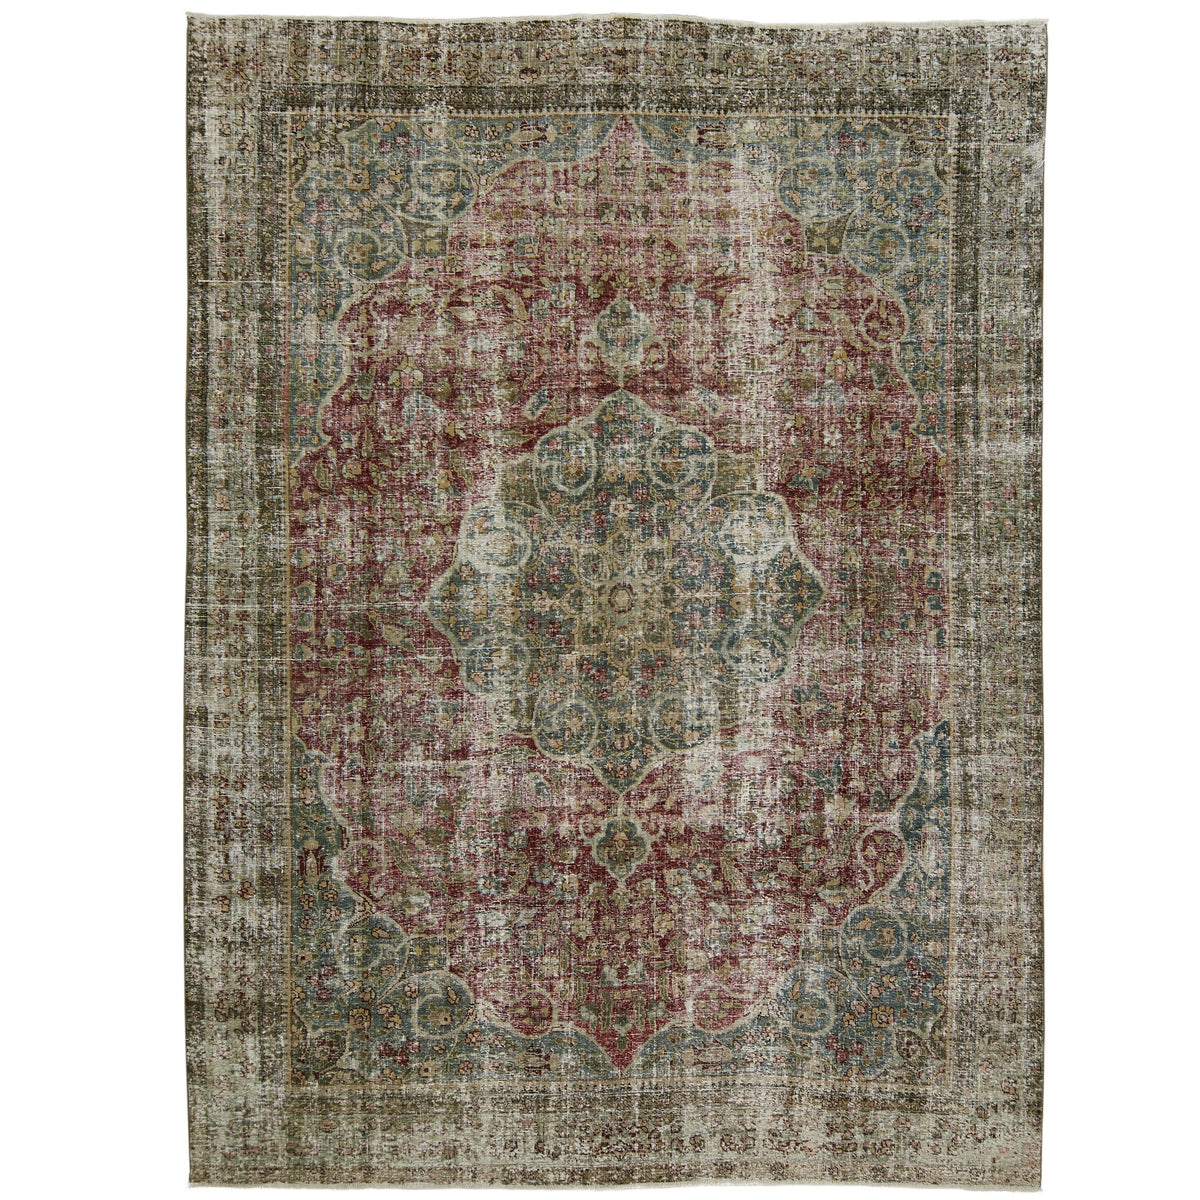 Macy - A Tapestry of Tabriz Tradition | Kuden Rugs